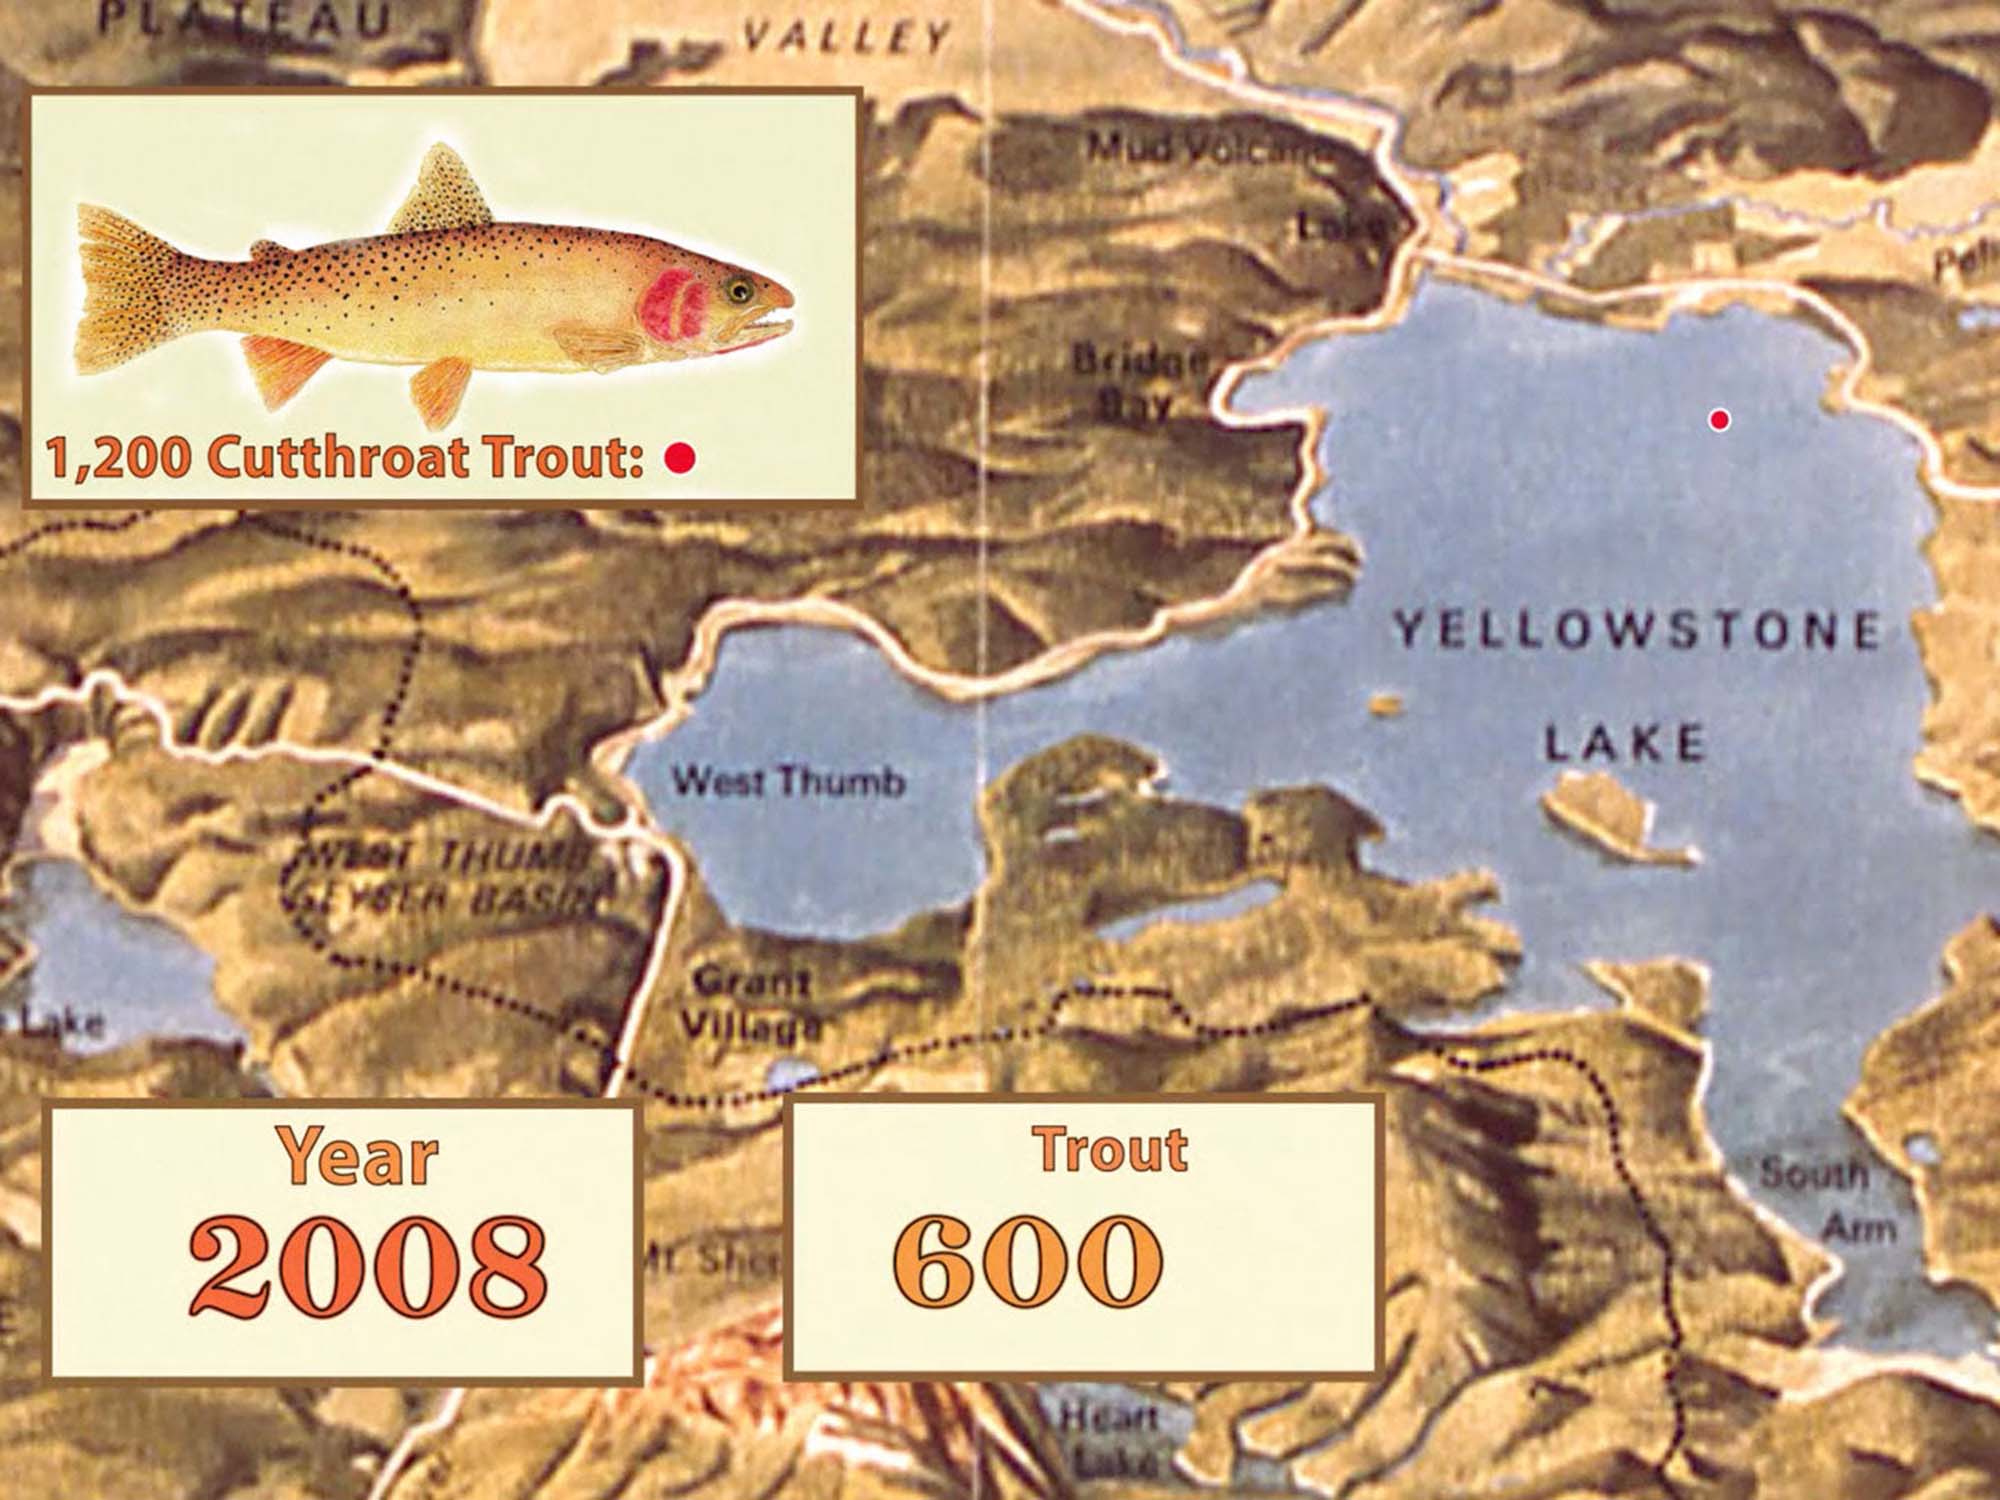 Yellowstone Invader | The Destruction of Non-Native Lake Trout [VIDEO]